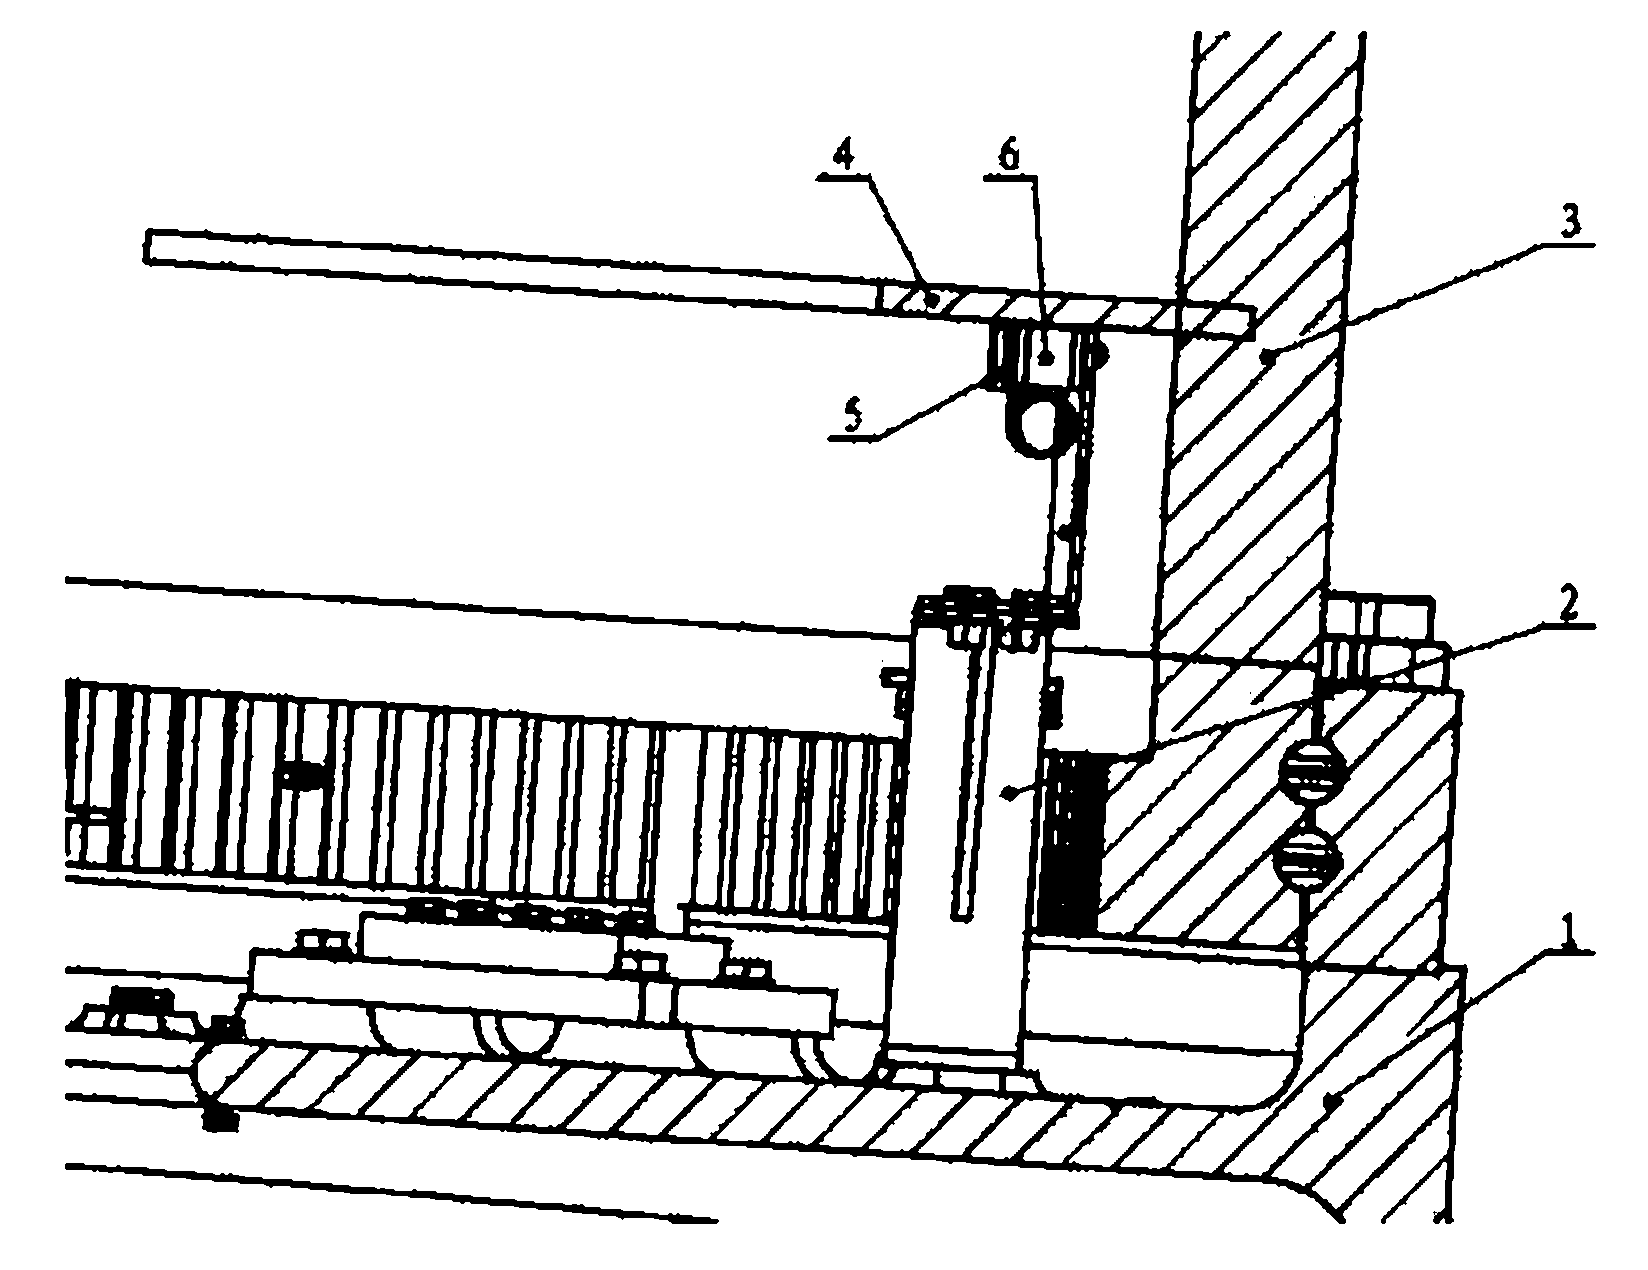 Lightening protection device for wind generating set blade